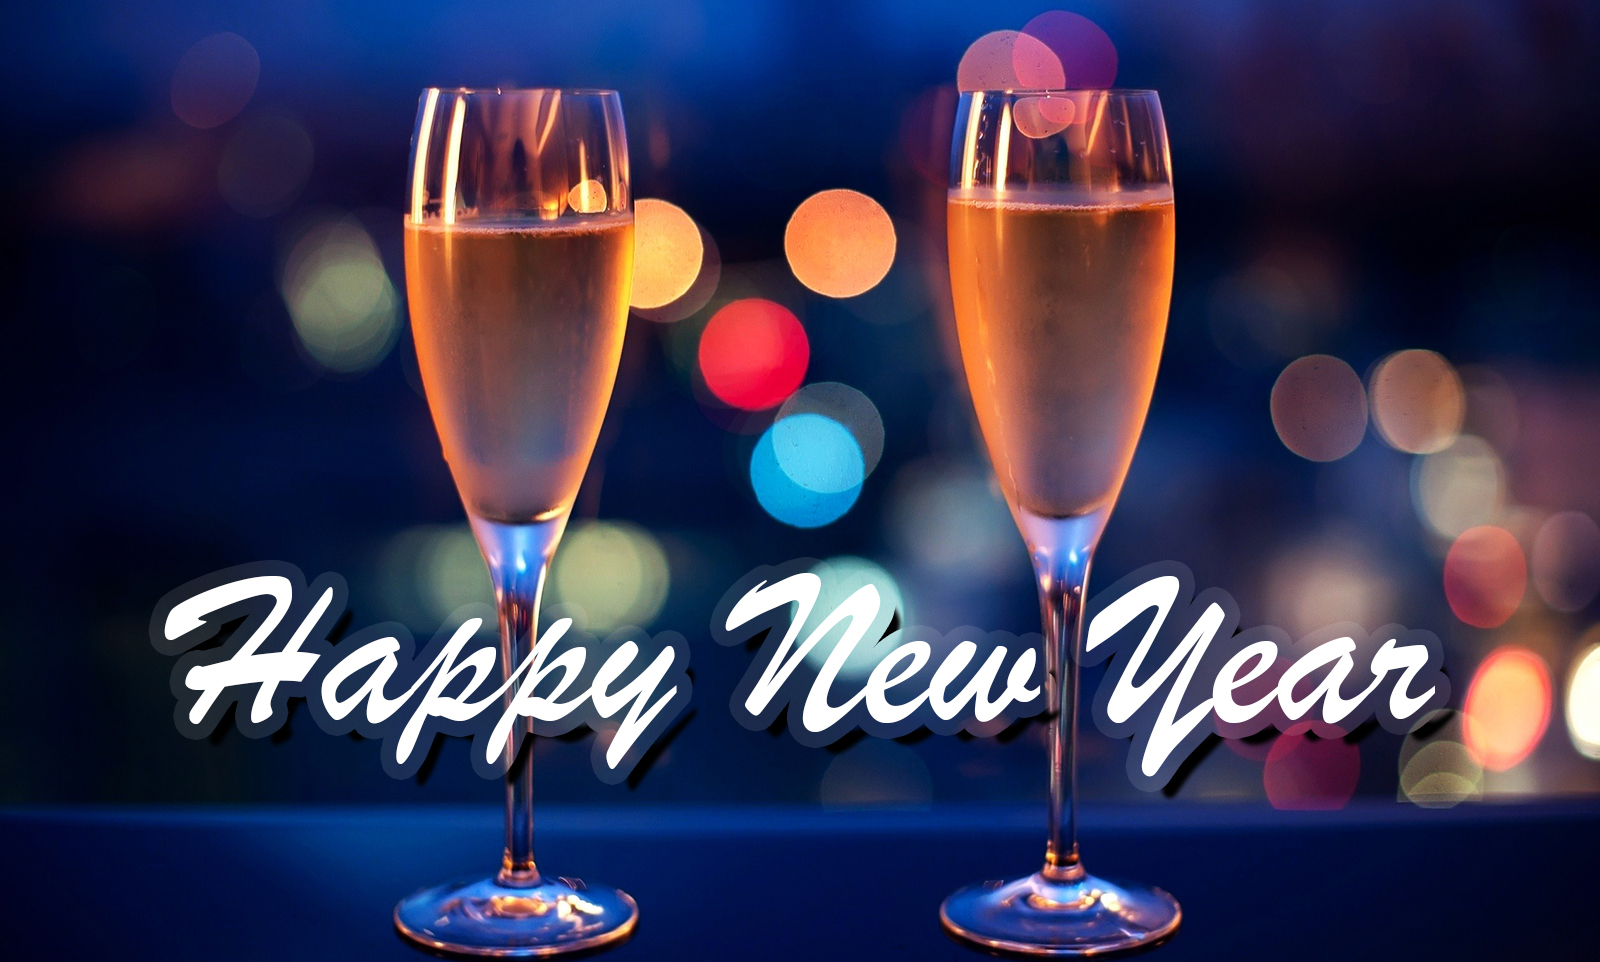 Happy New Year Eve Wallpaper Image Photos